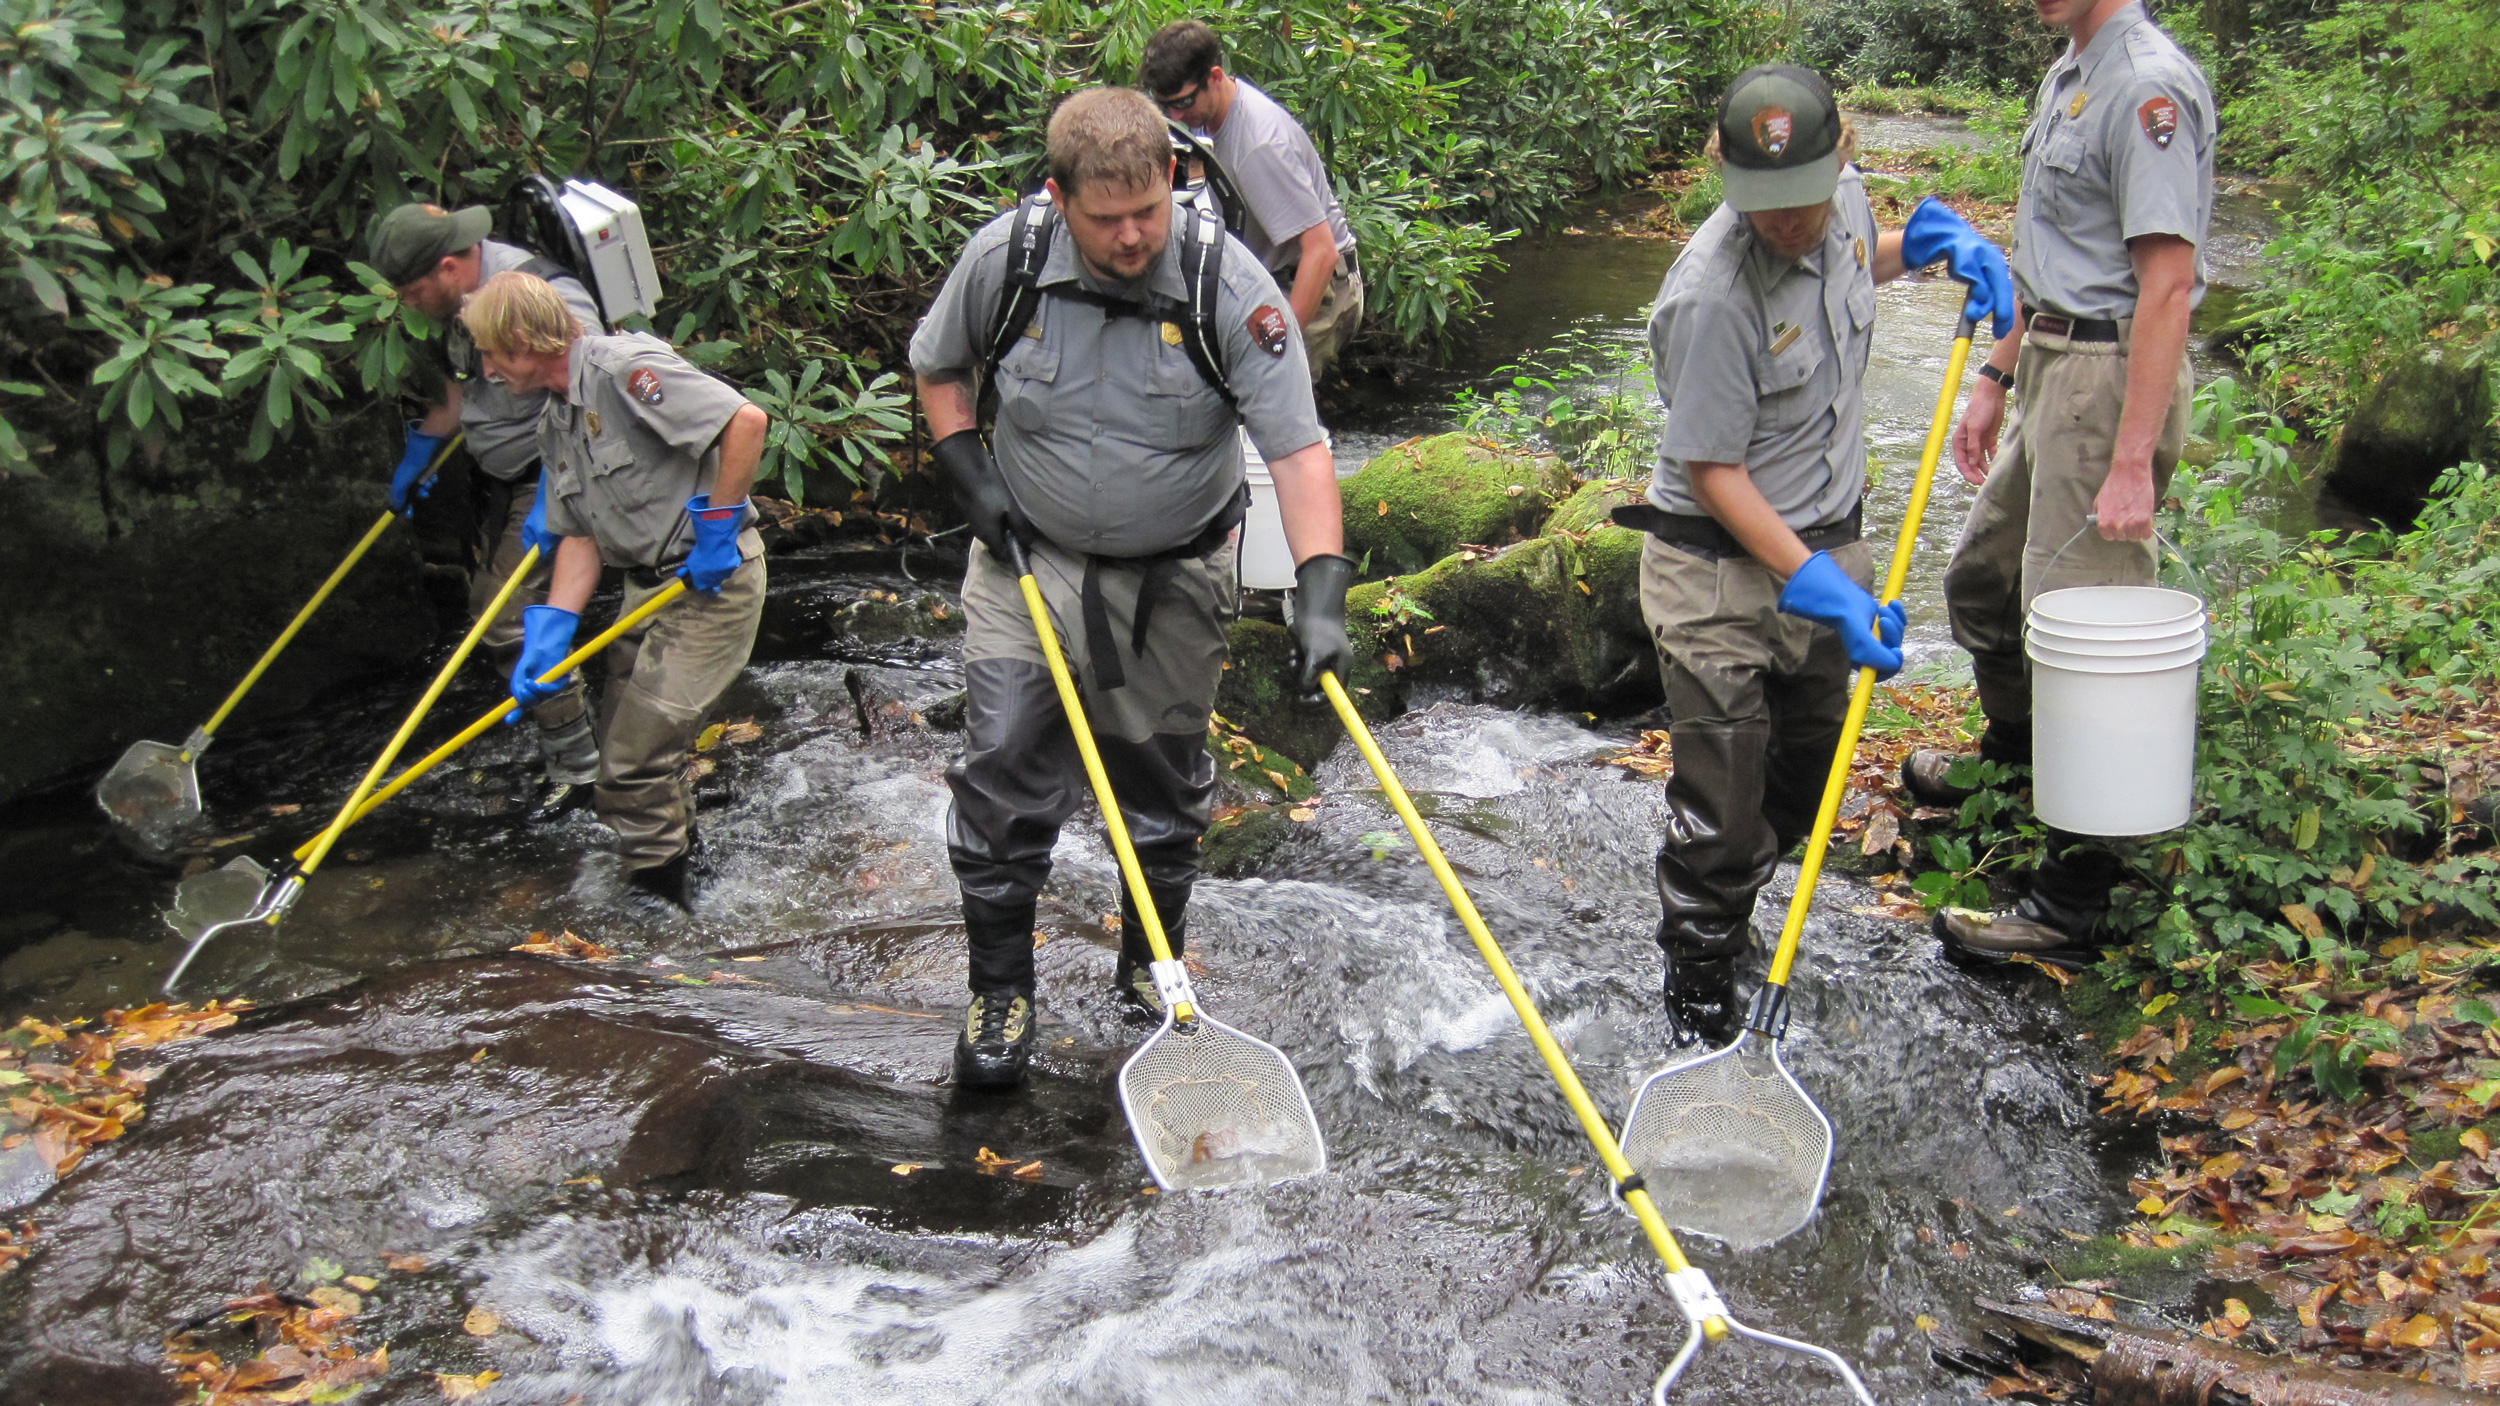 Fishery crew surveying a brook trout stream in GRSM via electrofishing. (In some cases, we have used electrofishing only as a means of brook trout restorations to remove non-native fish such as rainbow and brown trout. However, the stream has to be fairly small for electrofishing to prove a viable method. Photo courtesy of Great Smoky Mountain National Park